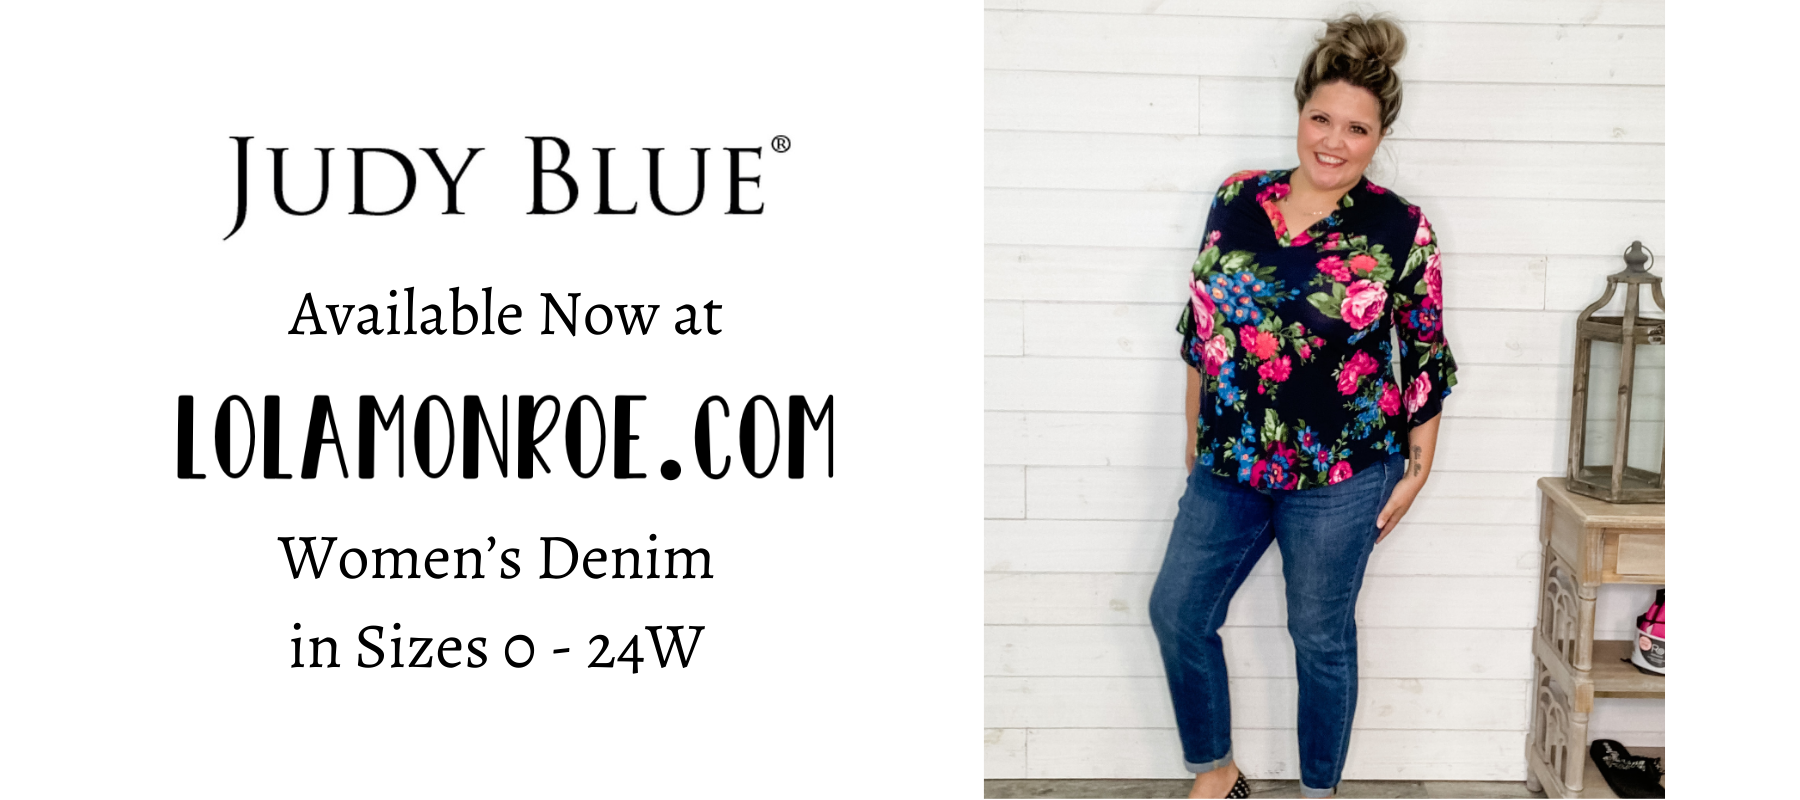 Judy Blue Available now at lolamonroe.com Women's Denim in sizes 0 - 24W